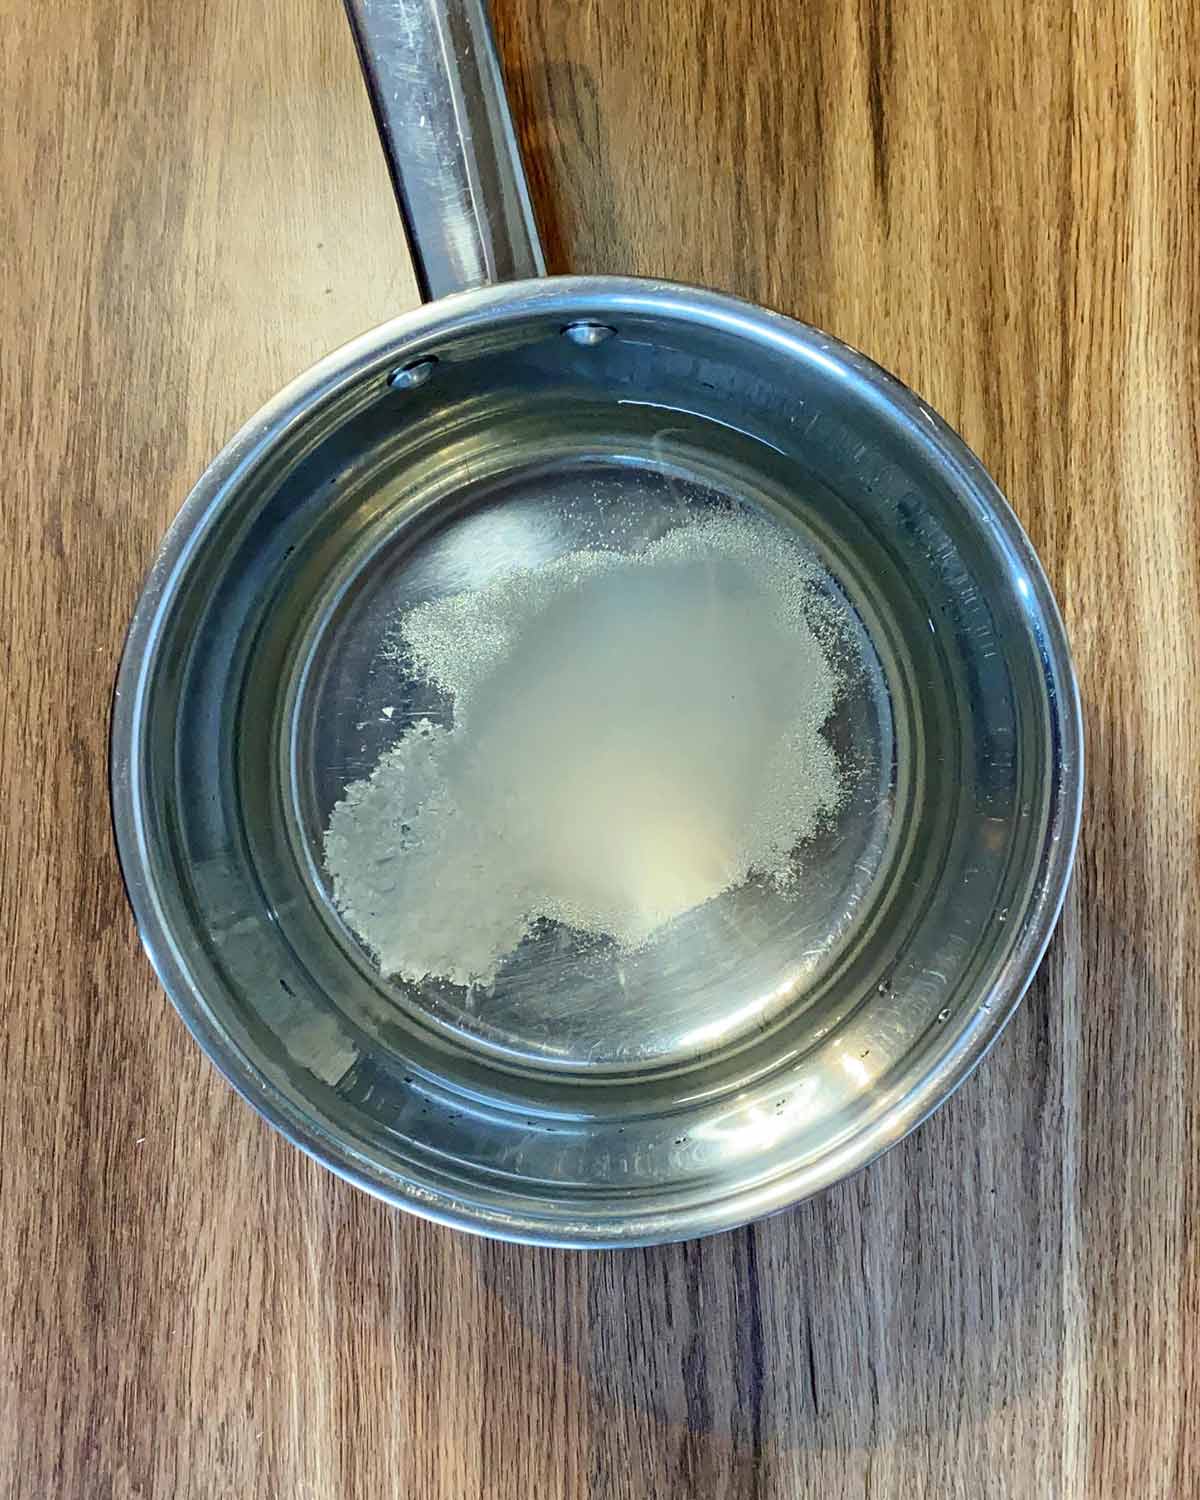 A saucepan with water, vinegar and sugar in it.